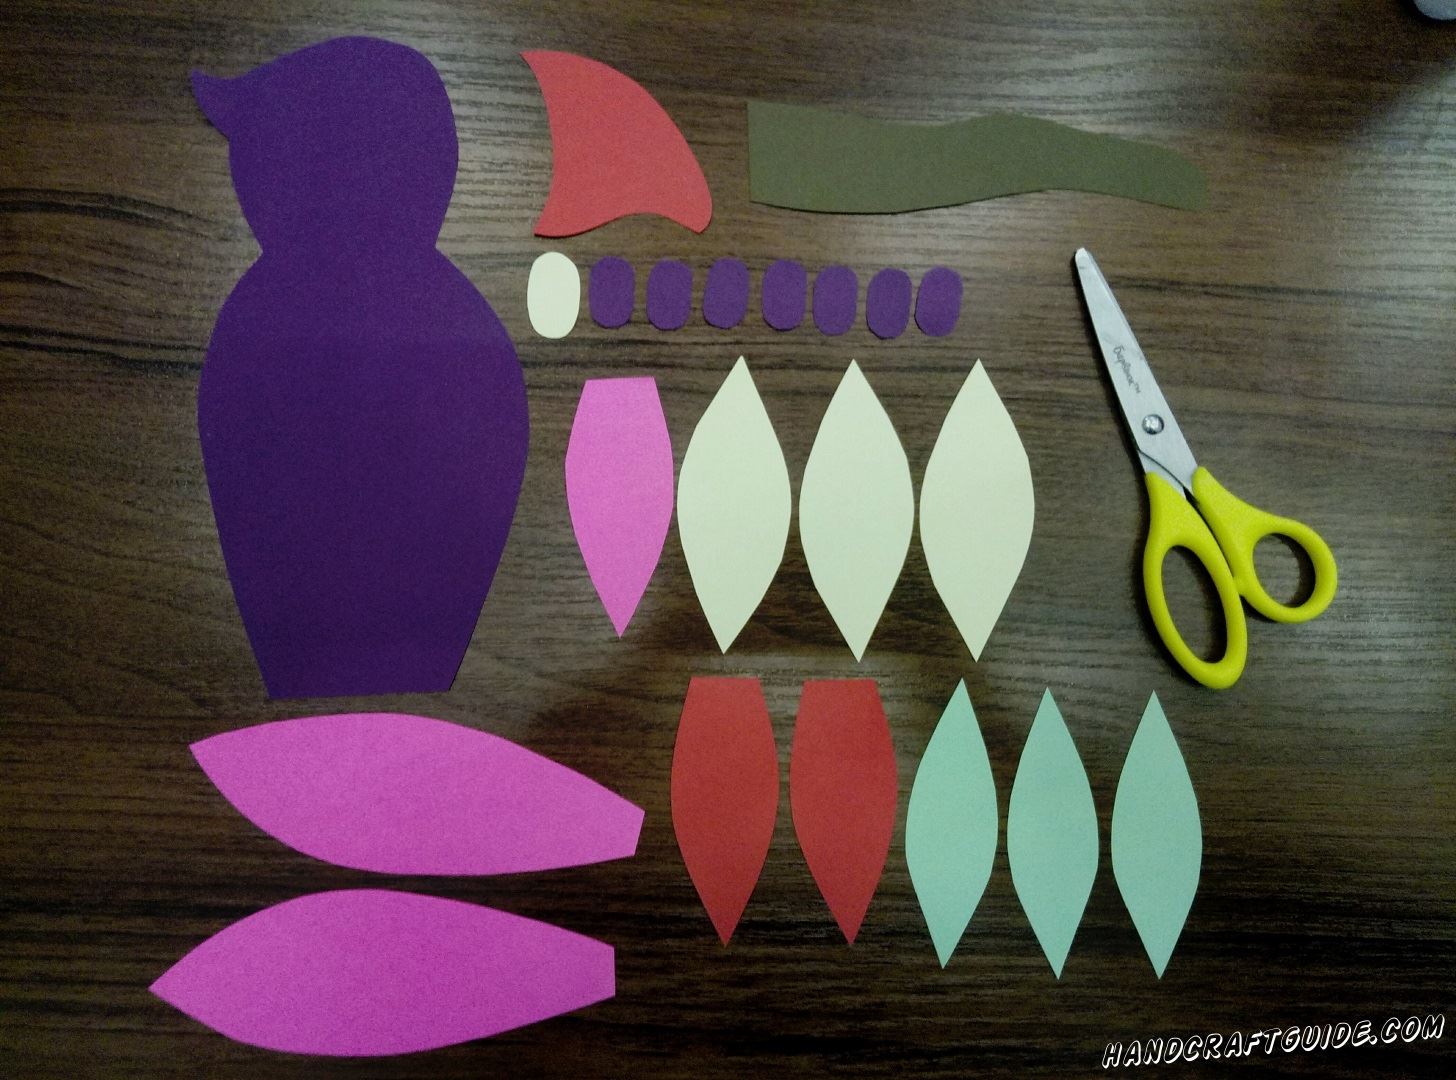 Let's begin with the preparation of all needed deatails. Take purple paper and cut out a figure like an 8 but without holes. Next cut out 7 small ovals from the same paper. Cut out white oval of the same size. Now take purple or pink paper and cut out 2 details, which resemble bunny's ears, and one detail like a tree leaf with a cut edge. Cut out 2 the same "cut" leafs from pink paper. Cut out a detail, like a shark fin, from red paper. Cut 3 petals out of yellow and turquoise paper. And, finally, a brown w